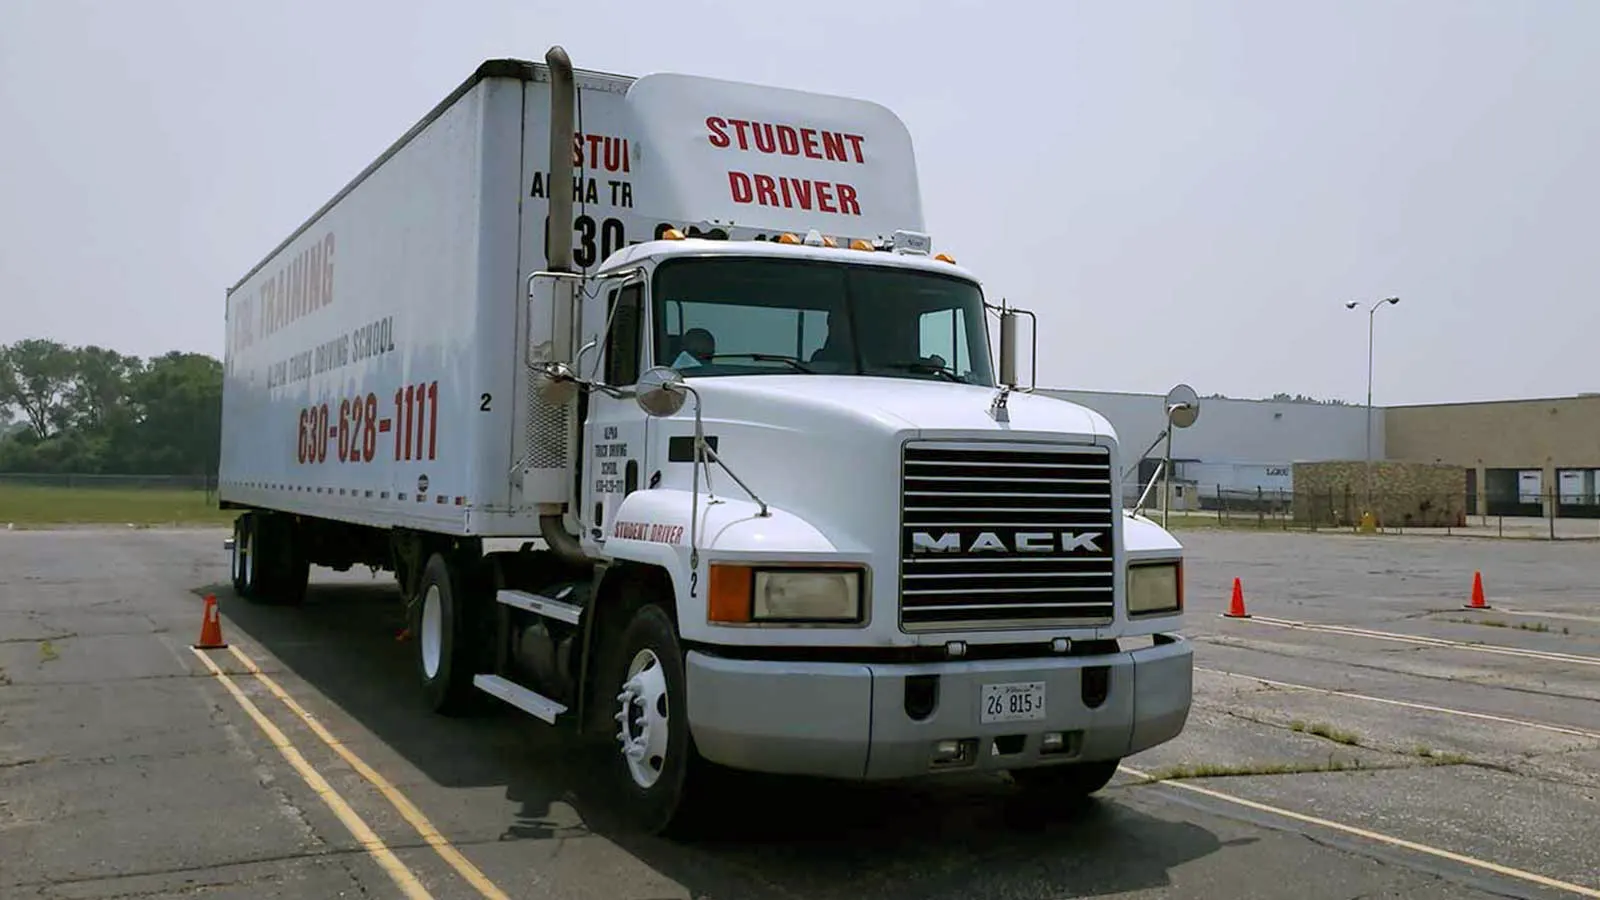 flexible financial aid for your CDL training program